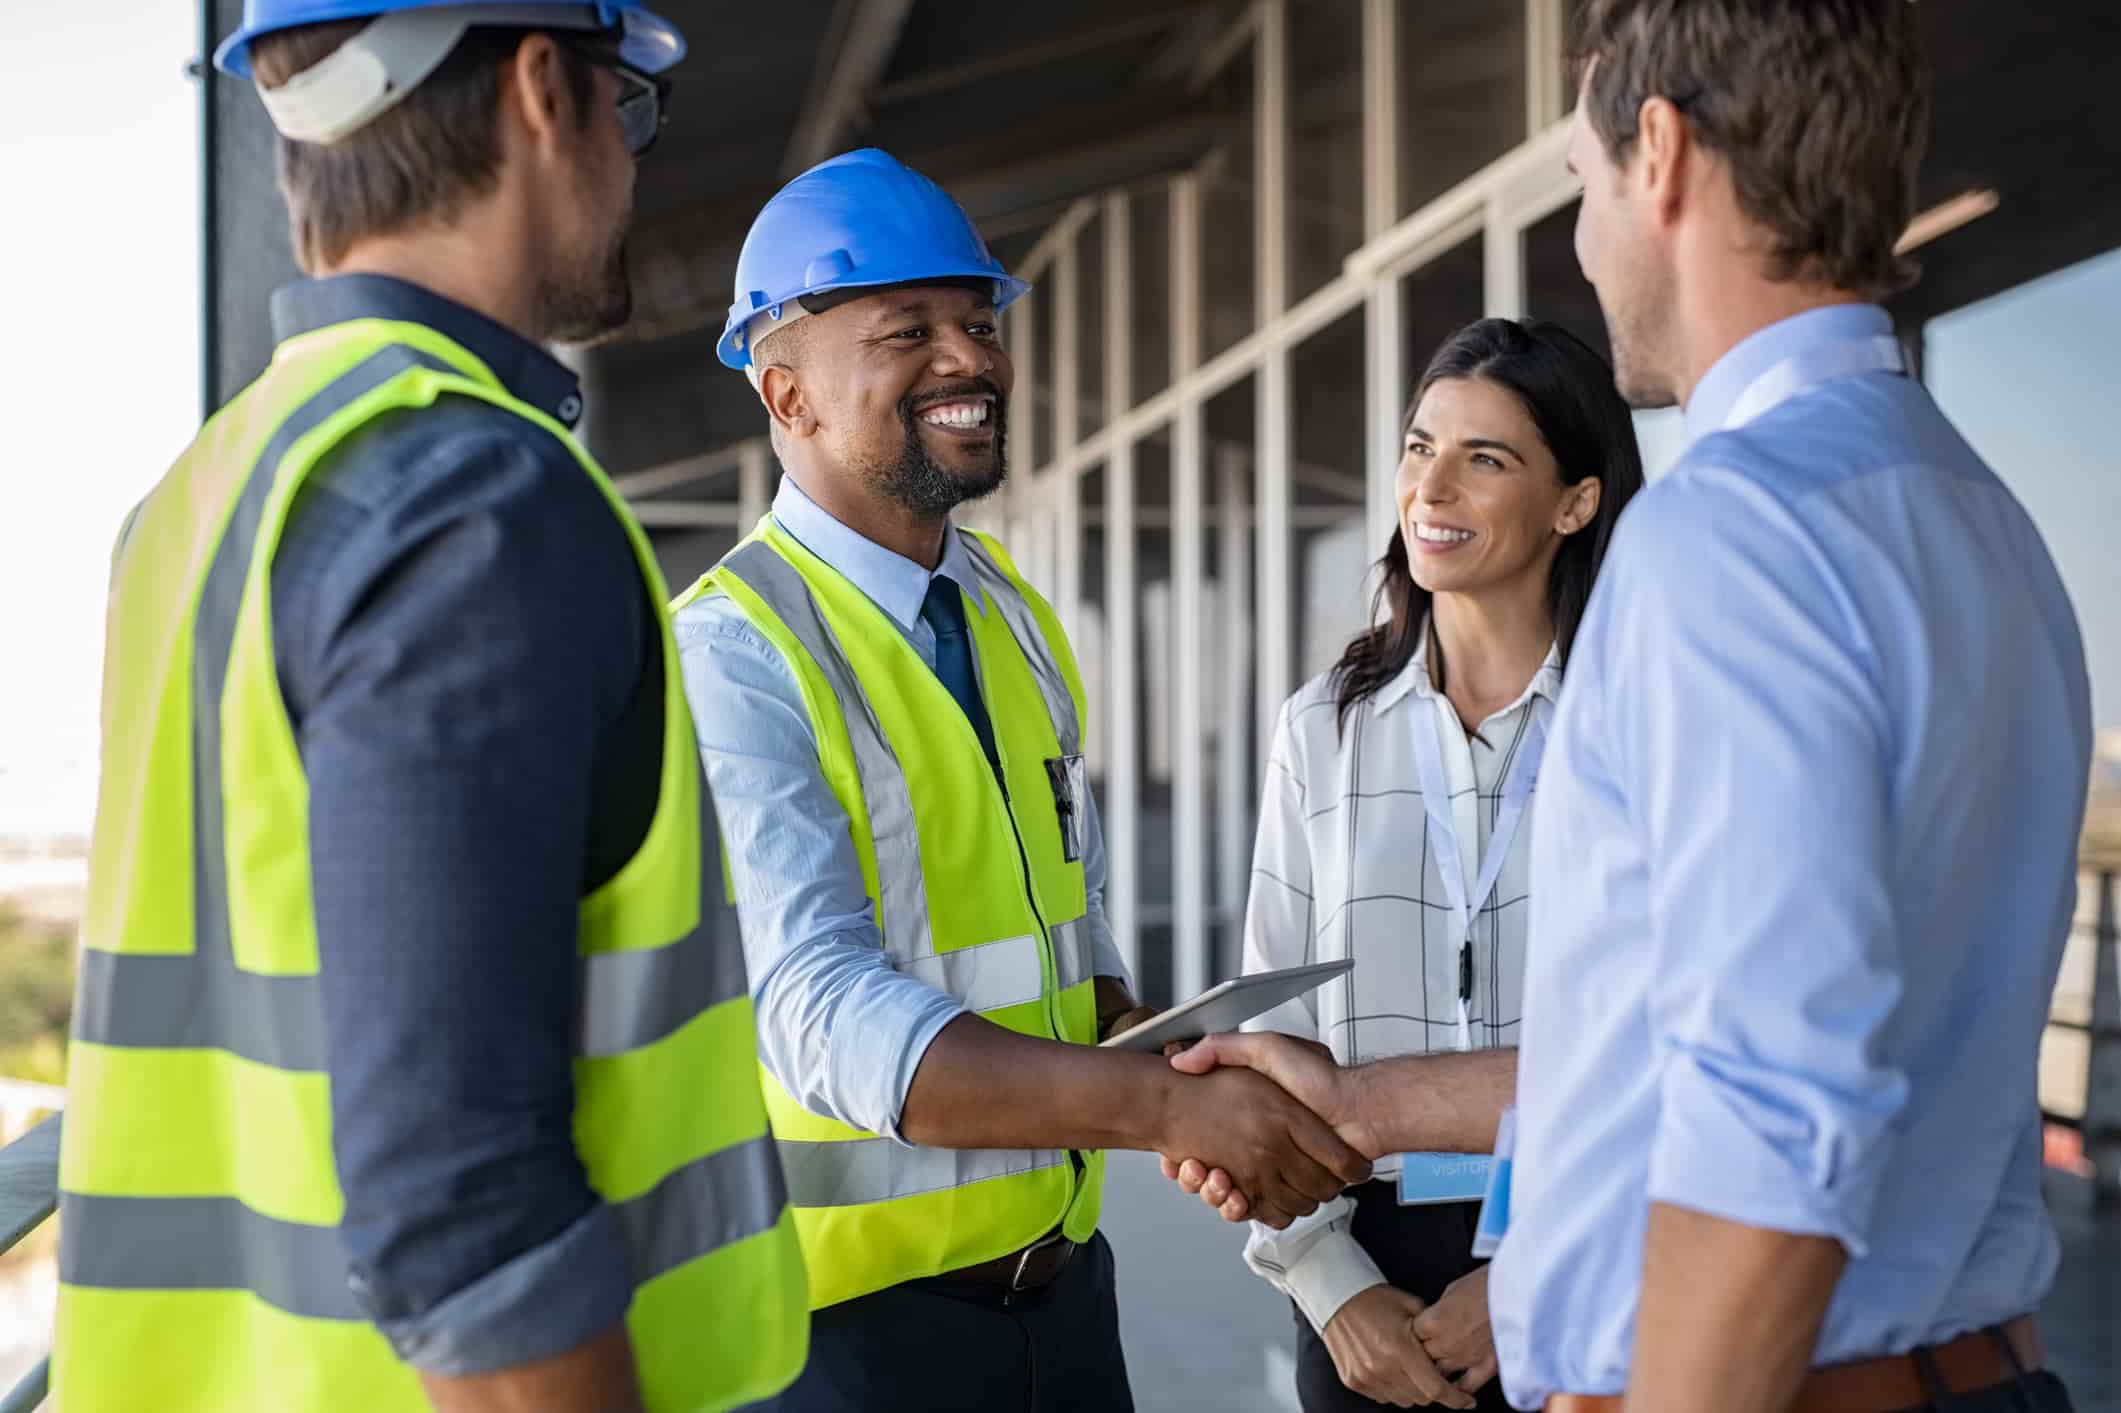 A team of four engineers and architects speak on a construction site. Two wear high visibility jackets and safety hats. One smiling man in a high vis shakes the hand of a man in a blue shirt